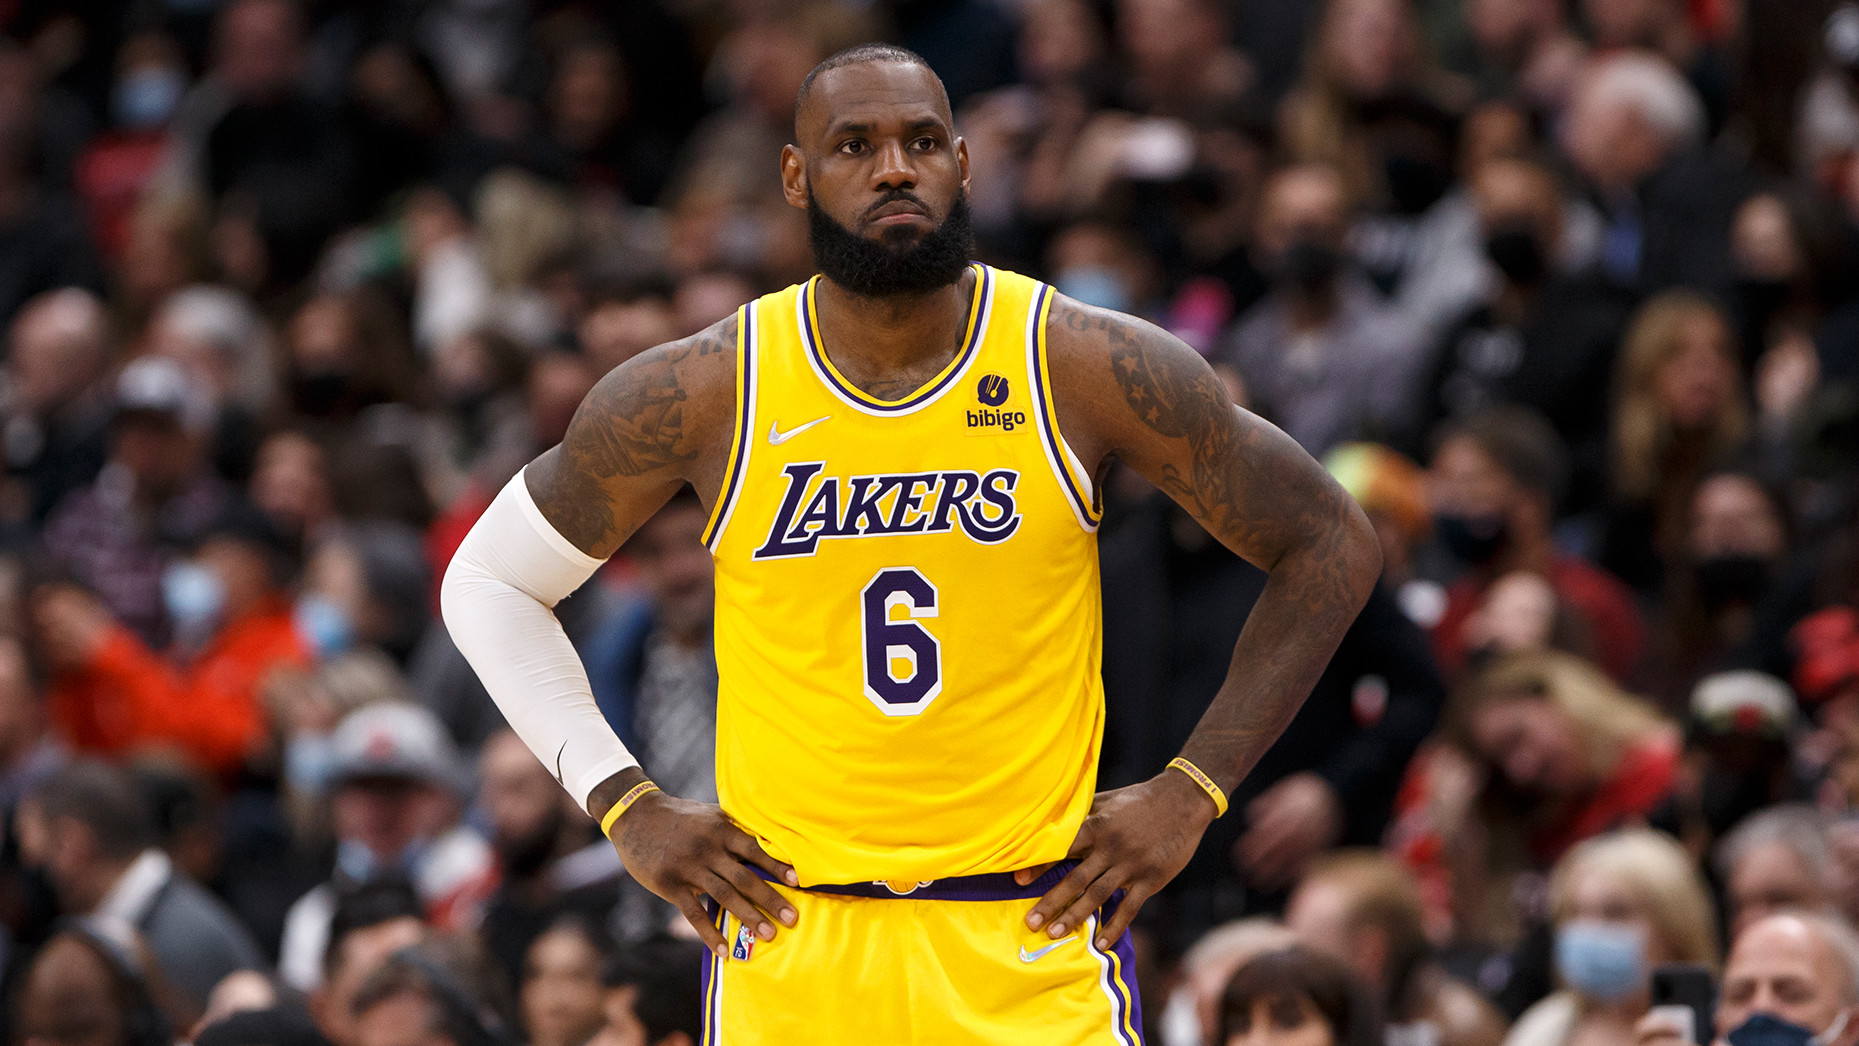 LeBron James #6 of the Los Angeles Lakers during their NBA game against the Toronto Raptors